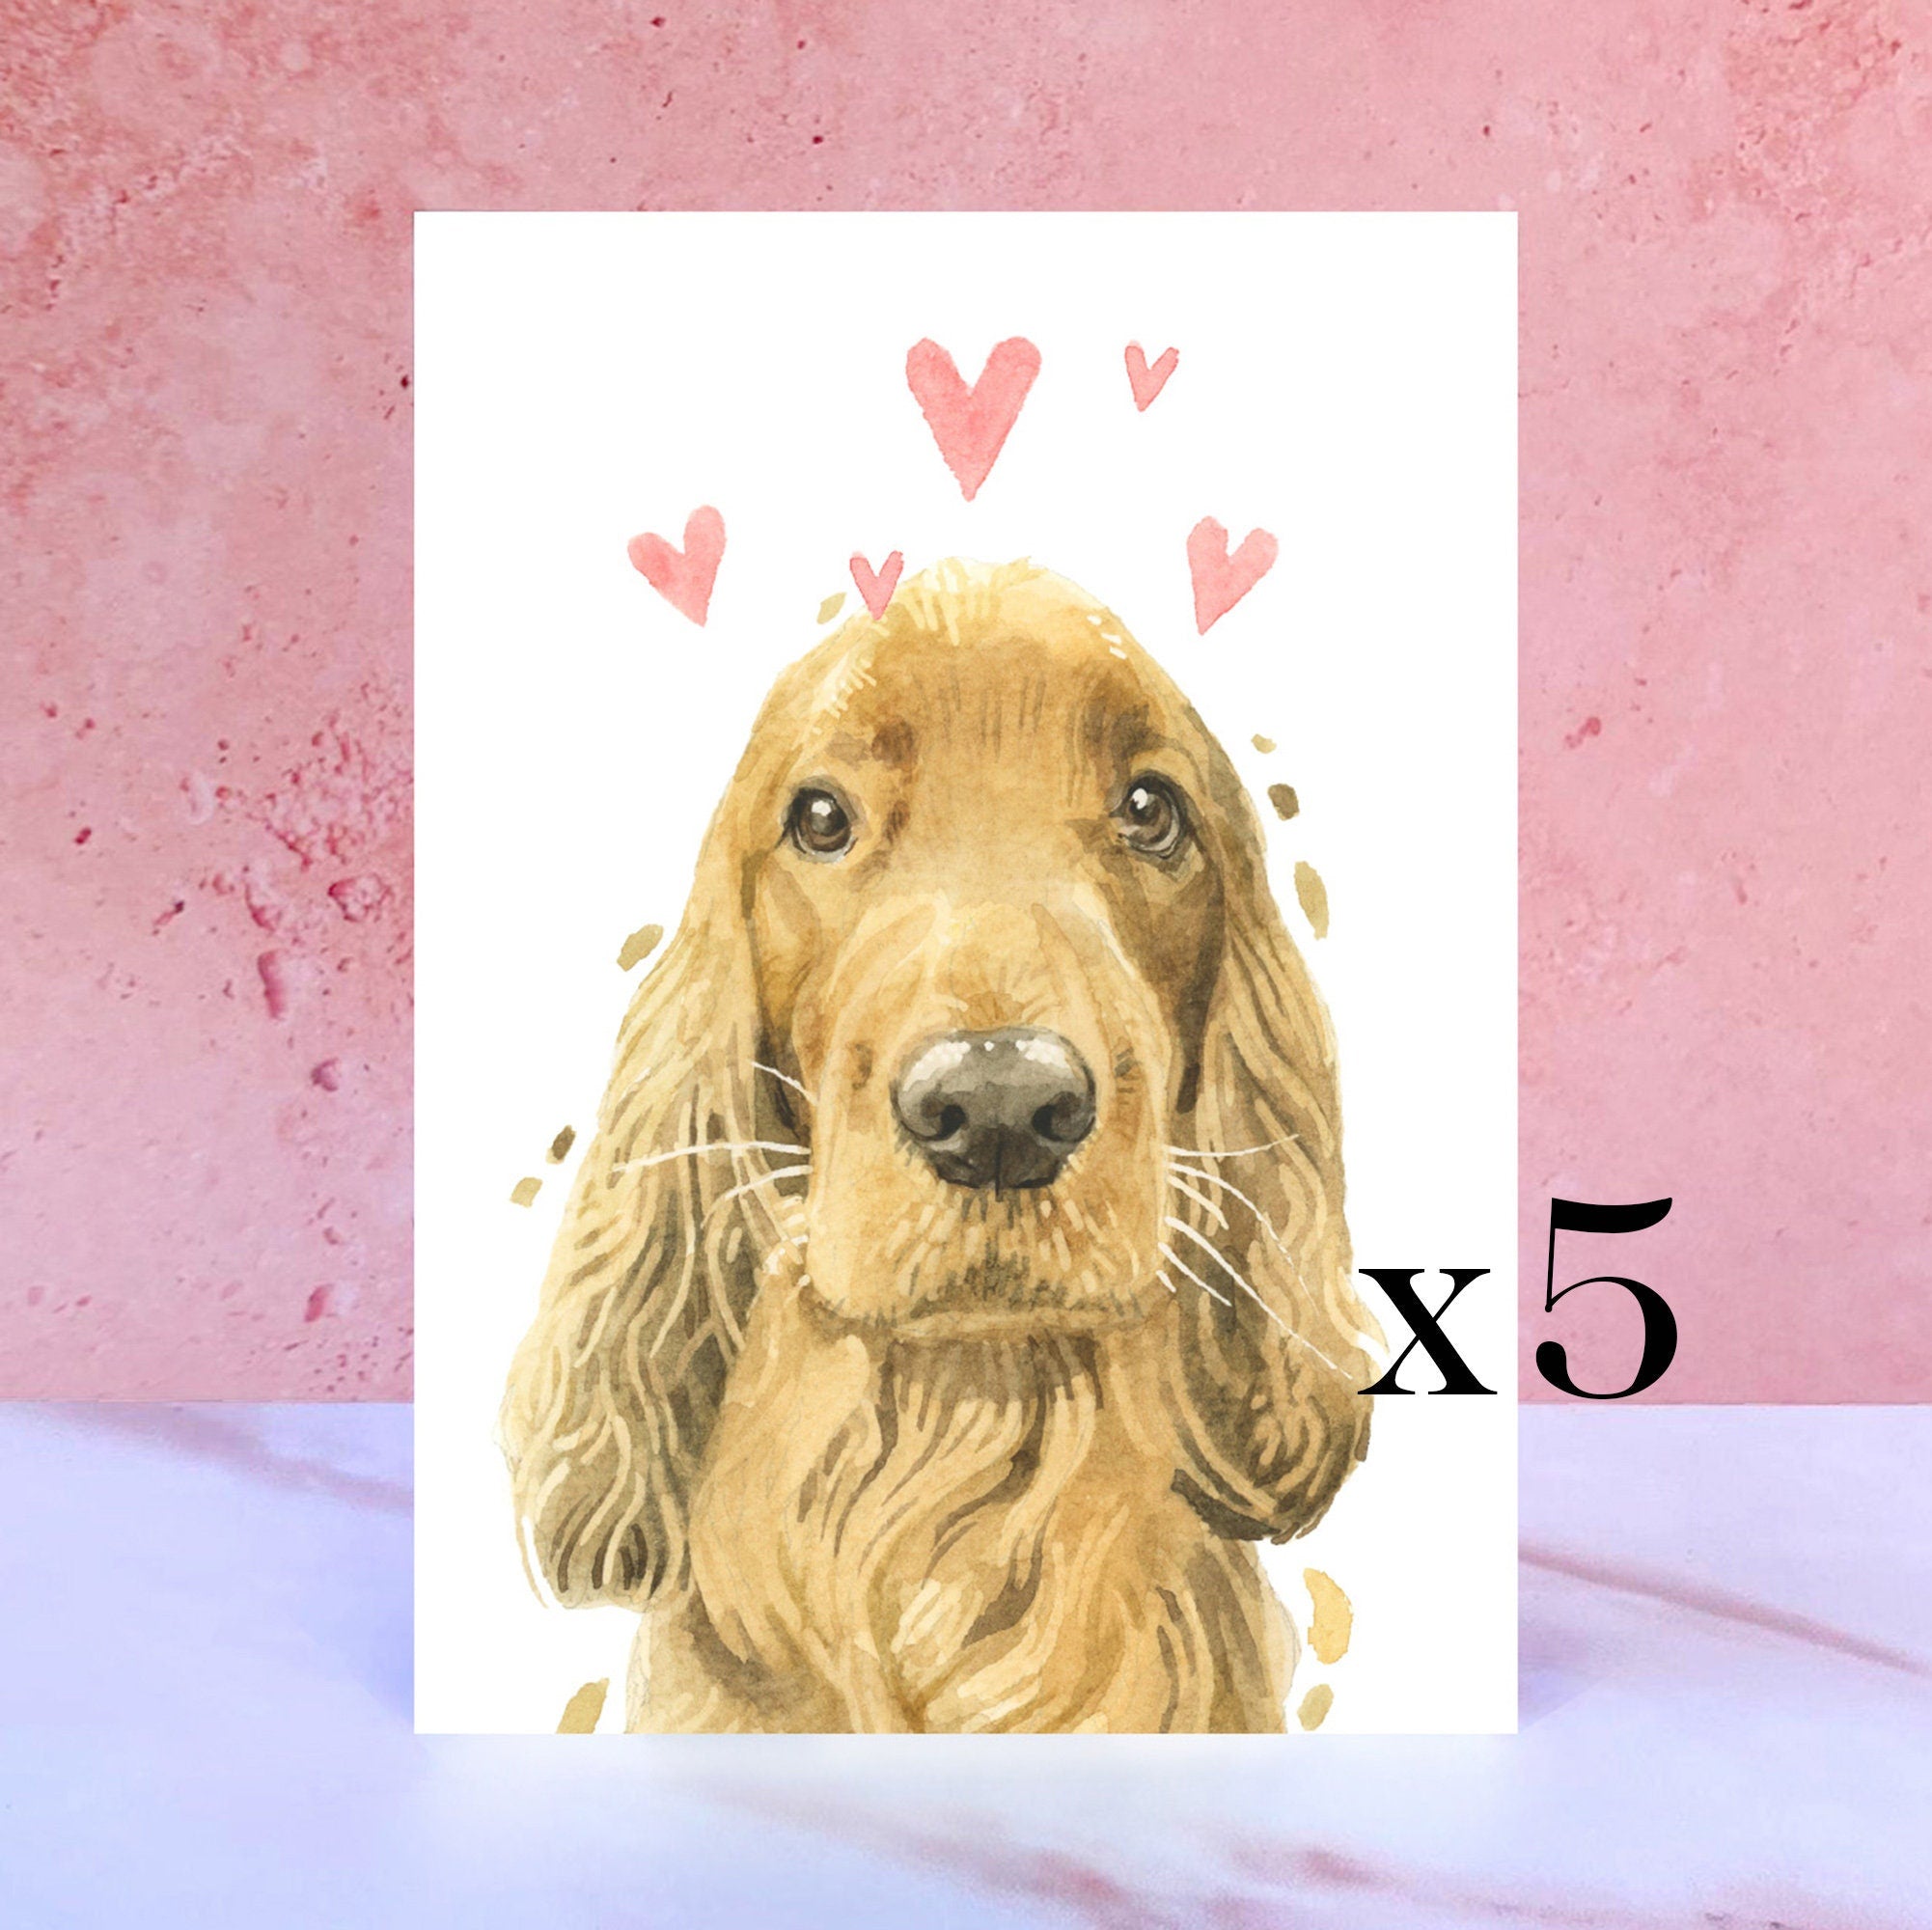 Pack of 5 Ginger Cocker Spaniel Licks & Kisses Card for Valentines, Anniversaries and from the Dog